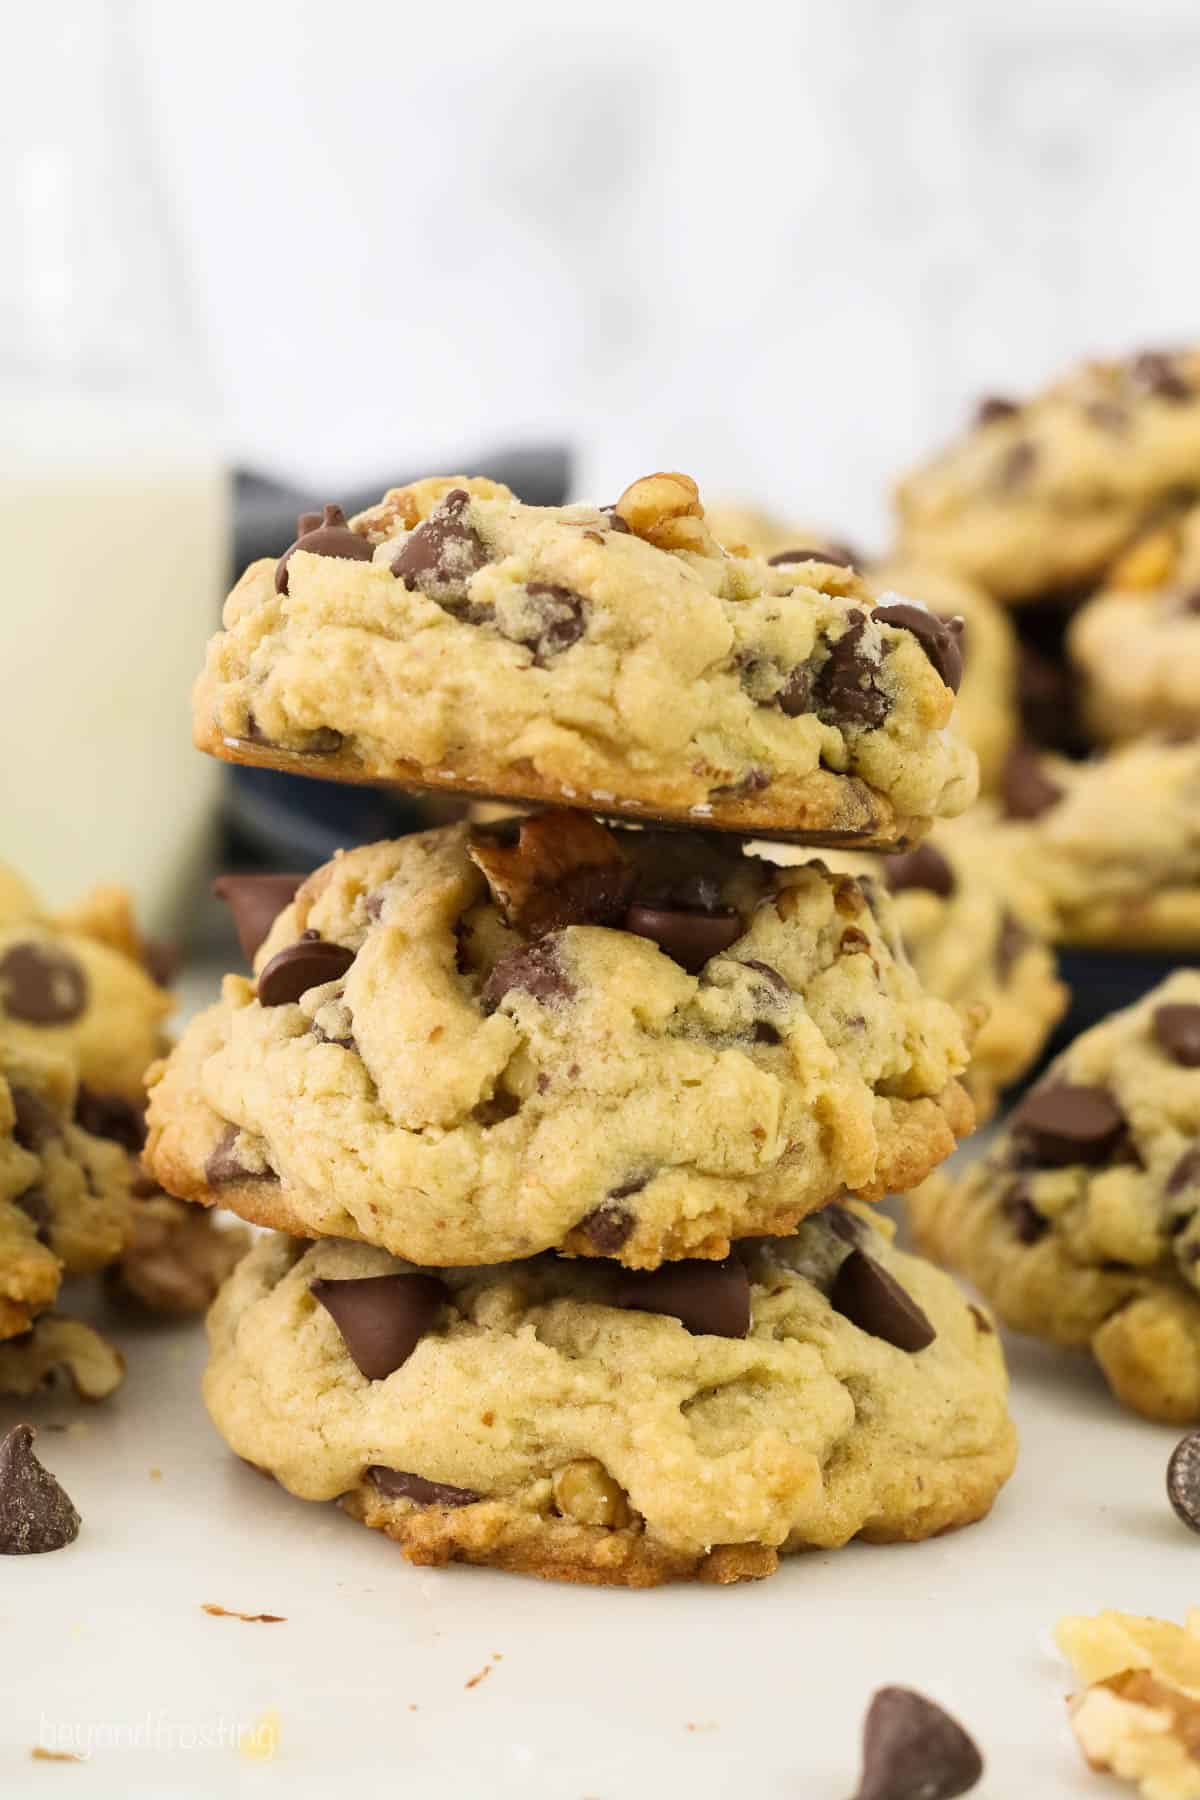 A stack of three chocolate chip and walnut cookies